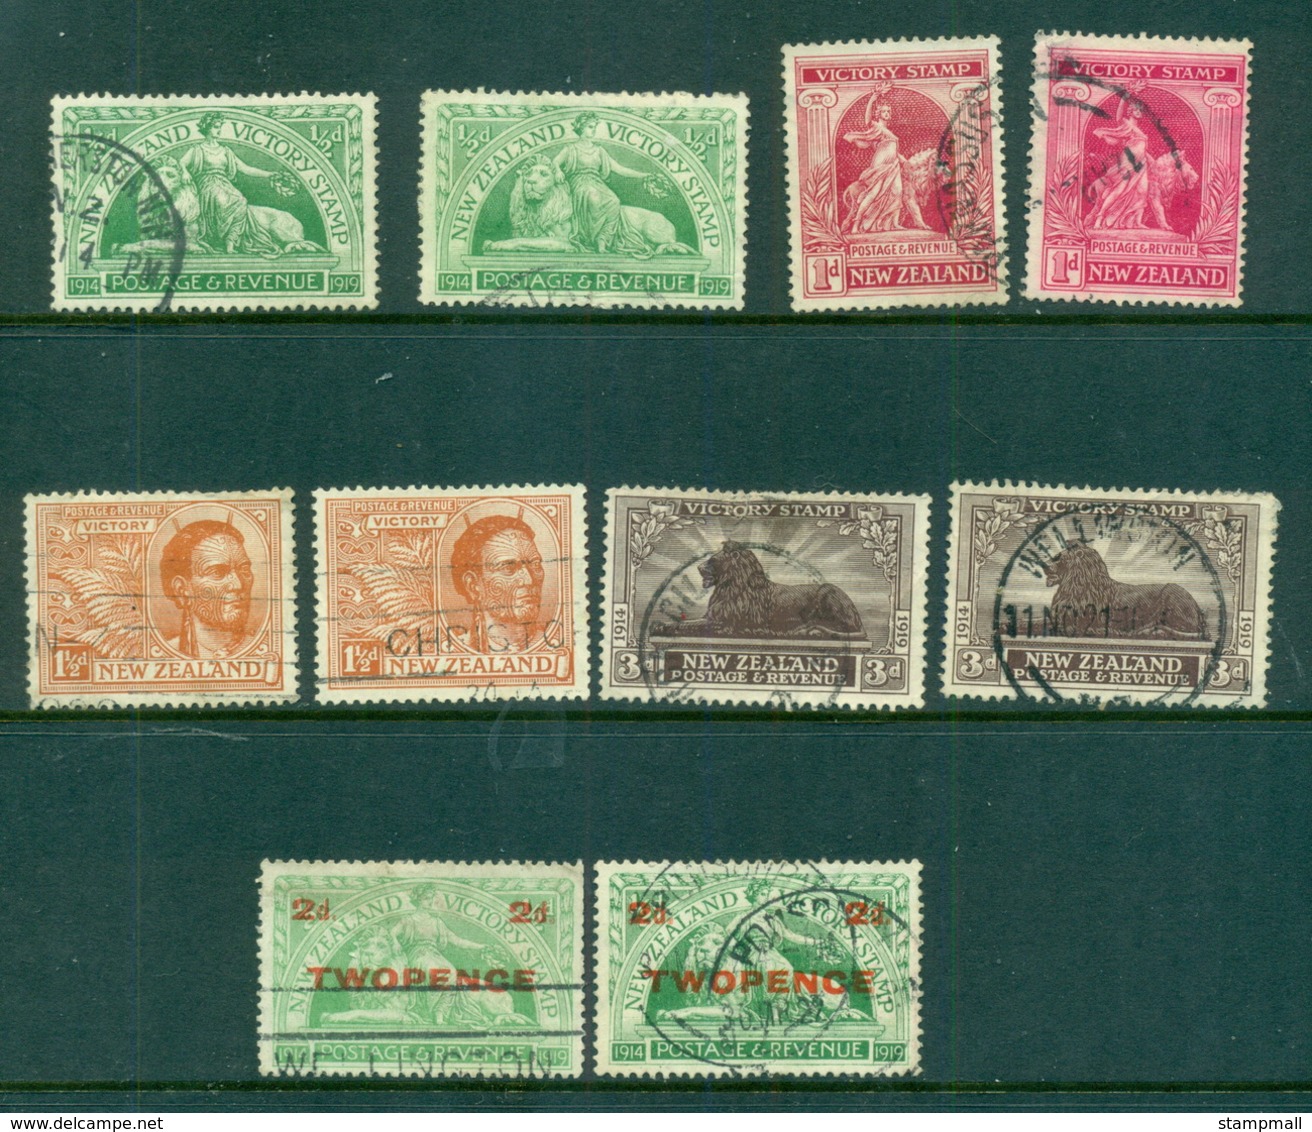 New Zealand 1920-22 Victory Issue Assorted Oddments (faults) FU Lot71531 - Used Stamps